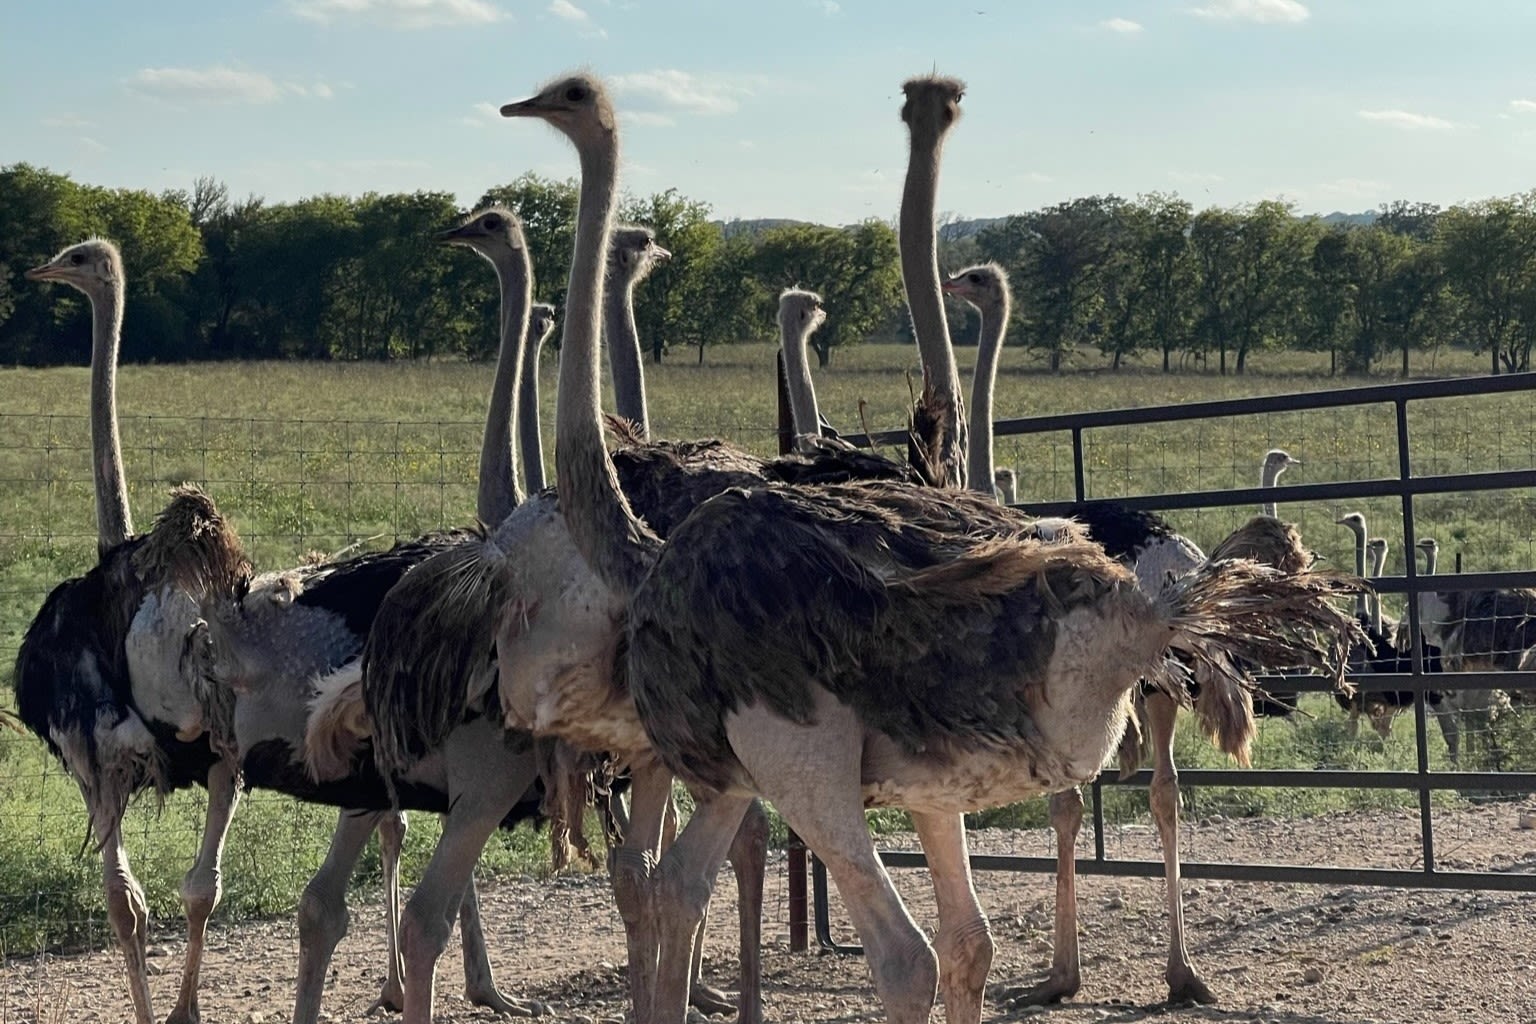 Texas ranch missing over 100 ostriches after disastrous floods